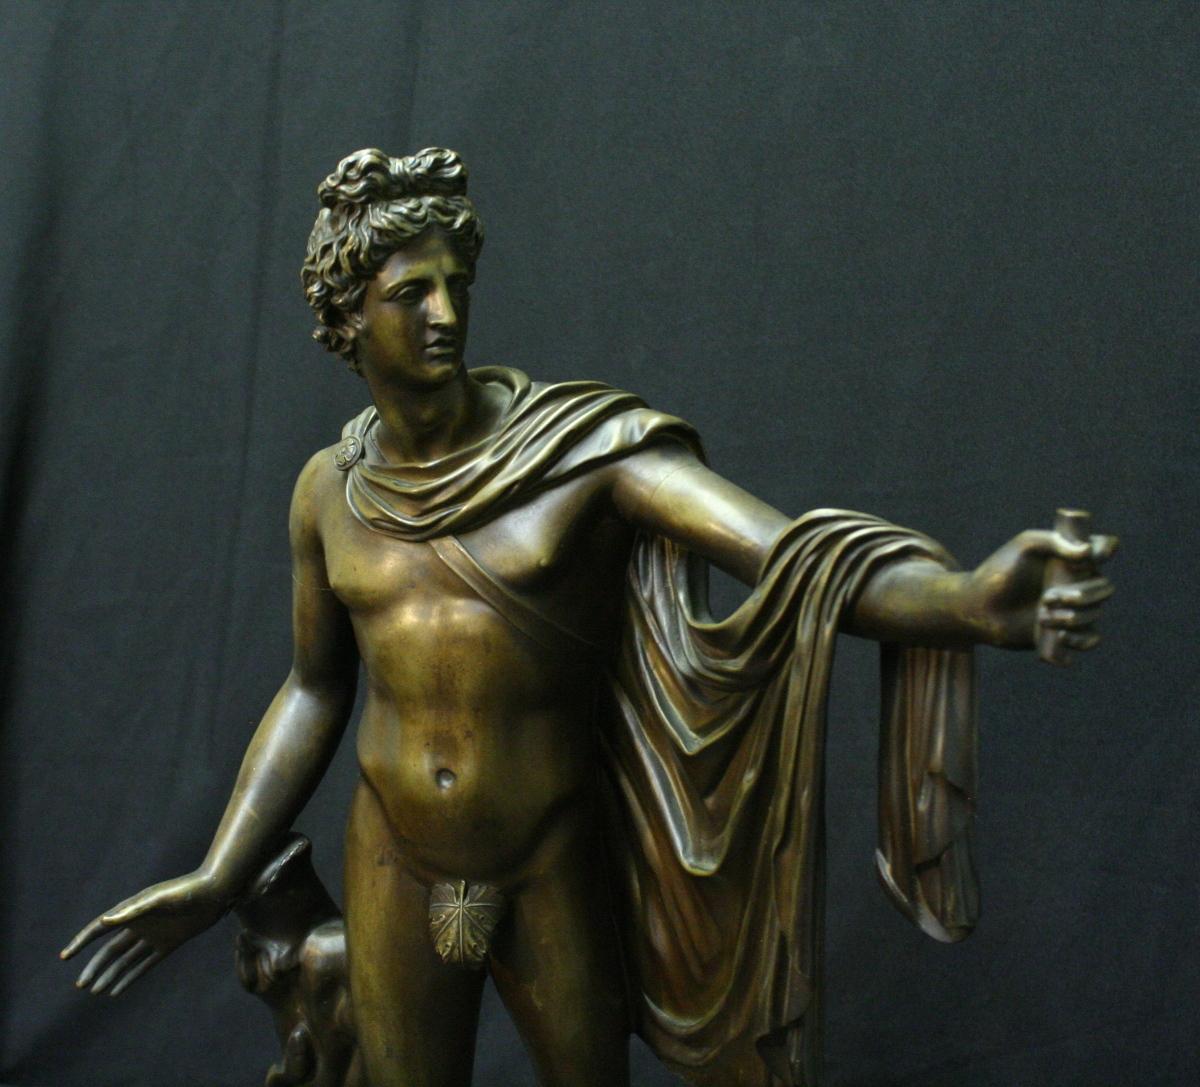 French patinated bronze figure of Apollo belvedere with in classical robes walking near a tree stump.
Early 20th century.

The original Apollo belvedere or Apollo of the belvedere, as portrayed in the final picture above, also called the Pythian